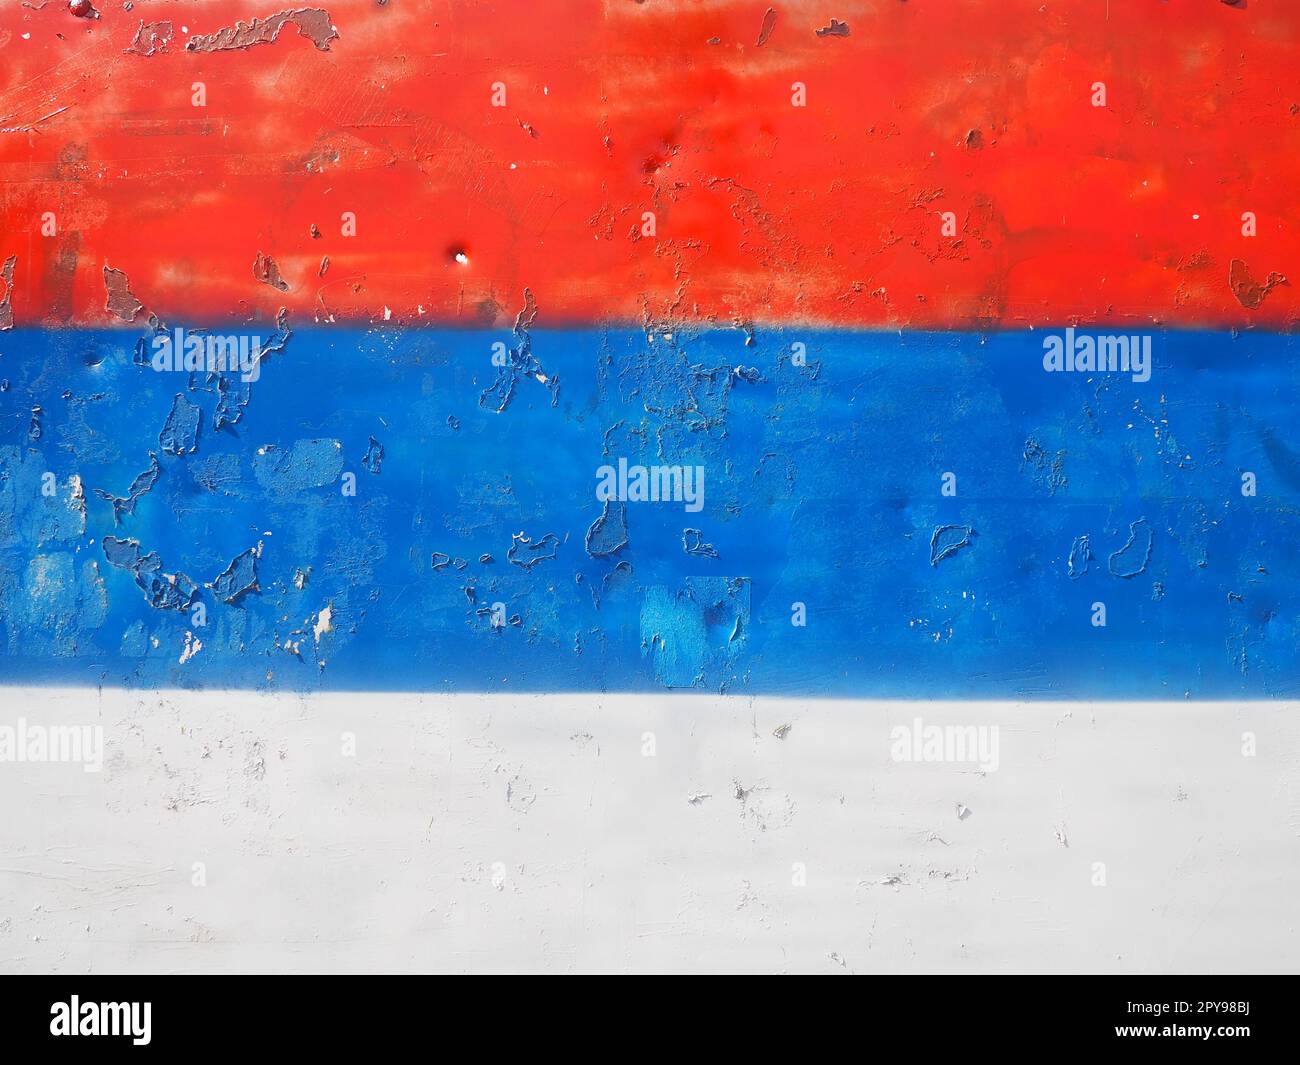 Serbian flag, tricolor red, blue, white painted on a metal surface. Peeling paint Stock Photo